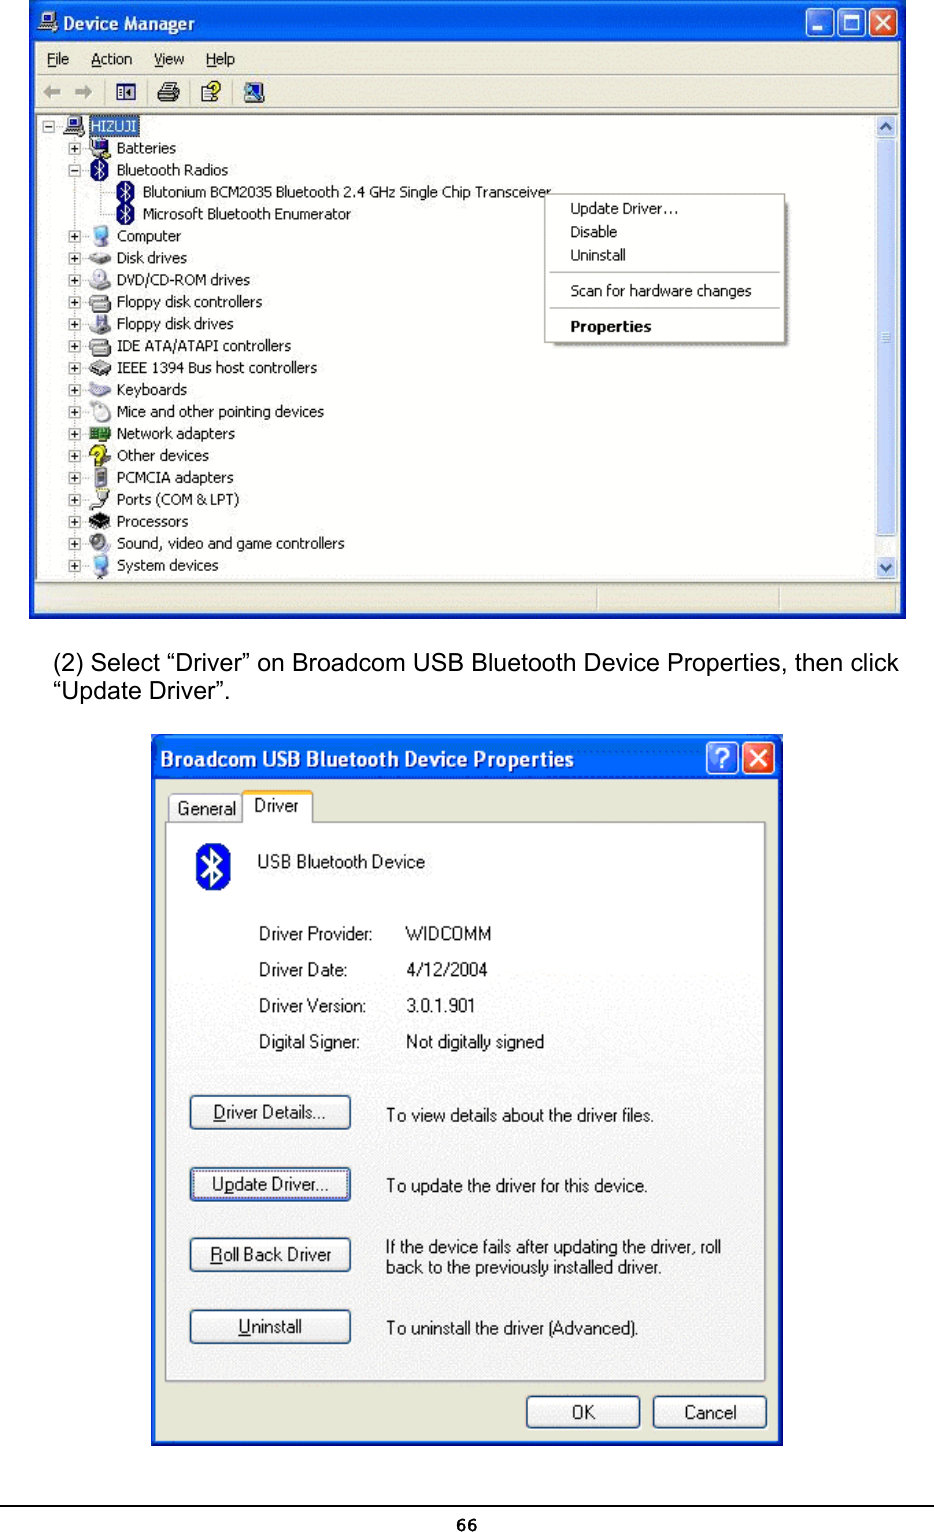   66 (2) Select “Driver” on Broadcom USB Bluetooth Device Properties, then click “Update Driver”.  